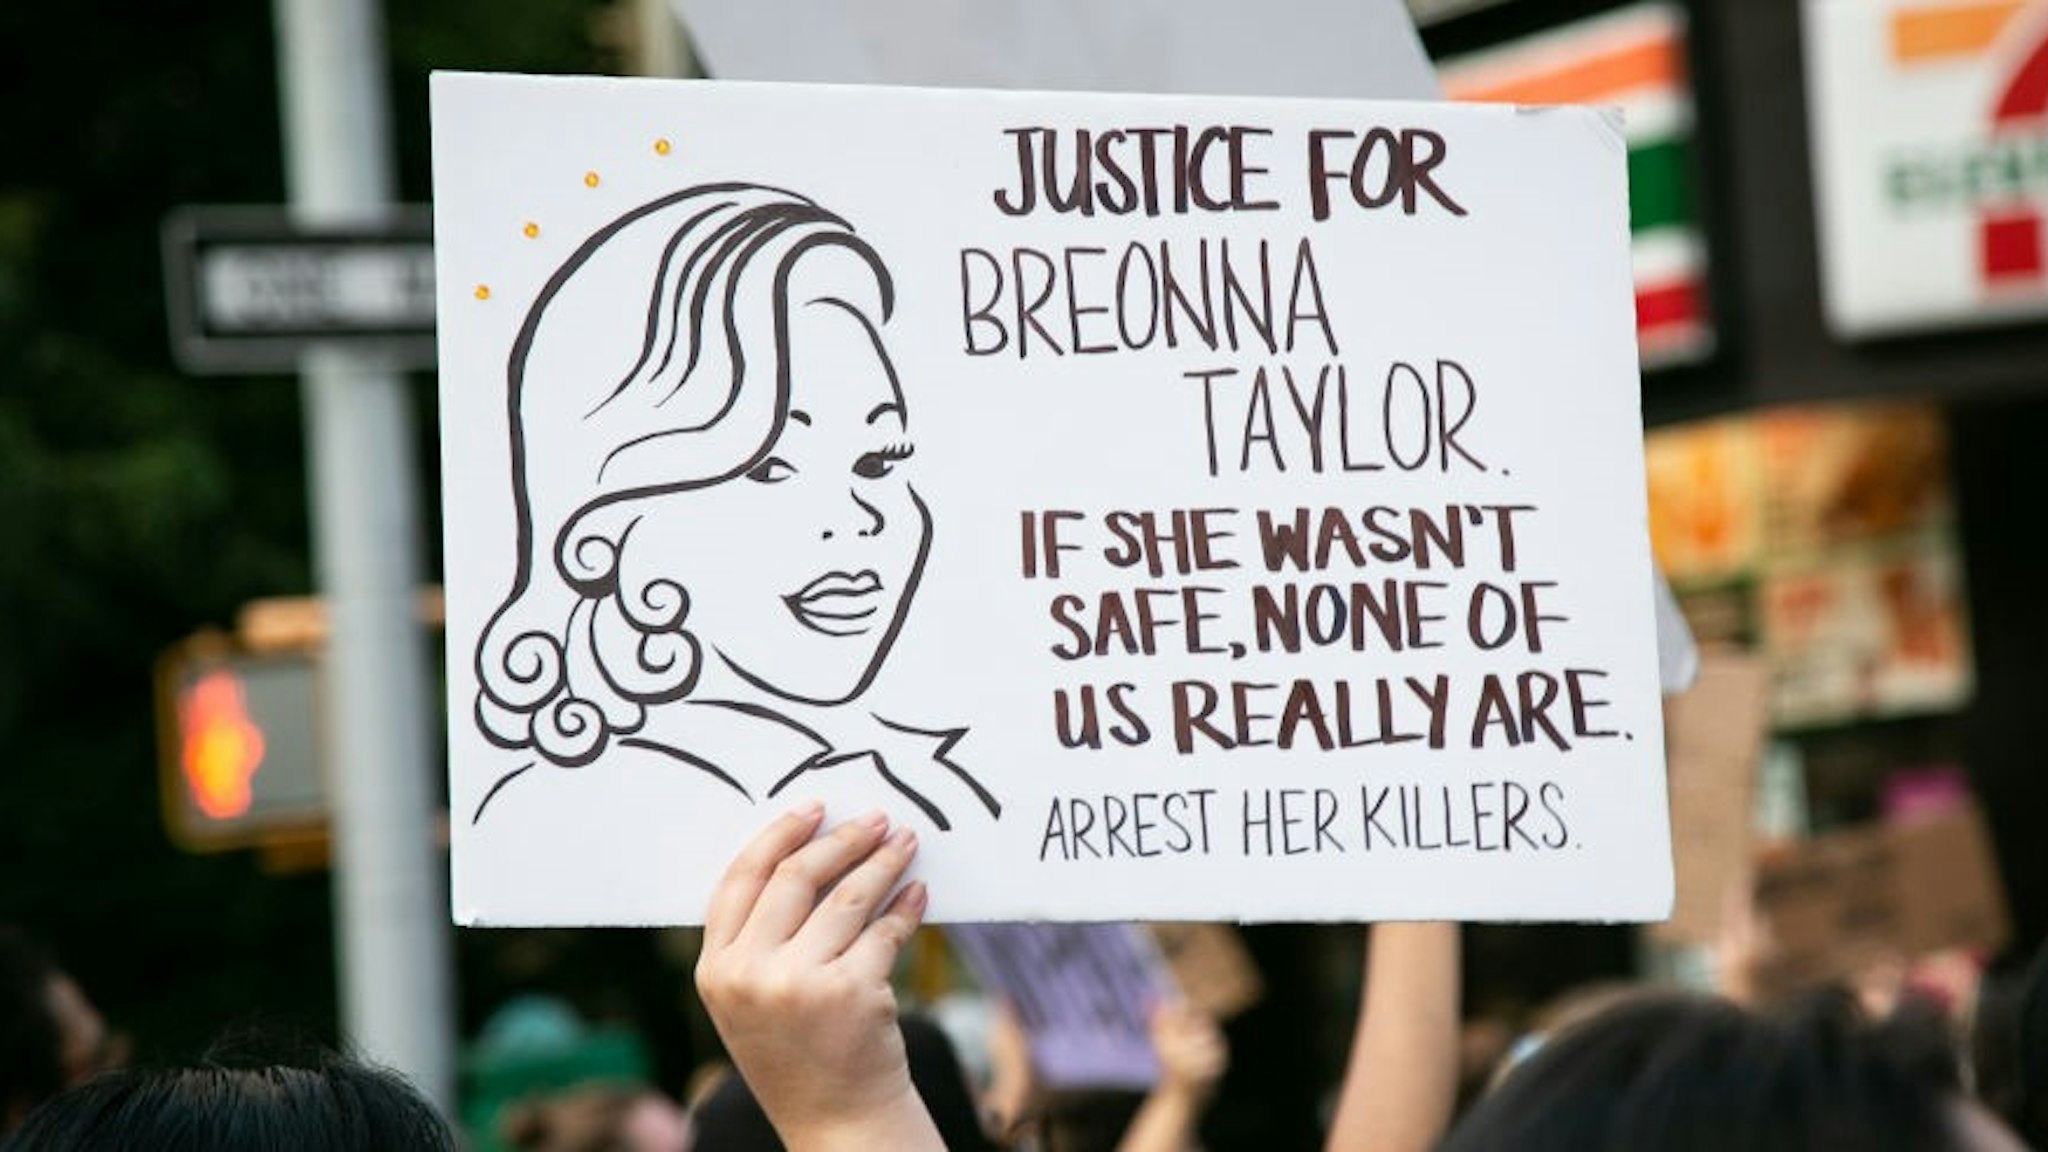 Hundreds of demonstrators gathered at Times Square, New York, US, on August 9, 2020 to call for justice in the case of Breonna Taylor. The 26-year-old African-American emergency medical technician was fatally shot by Louisville Metro Police Department (LMPD) officers Jonathan Mattingly, Brett Hankison, and Myles Cosgrove on March 13, 2020. The three LMPD officers executed a no-knock search warrant in plainclothes while entering her apartment in Louisville, Kentucky. (Photo by